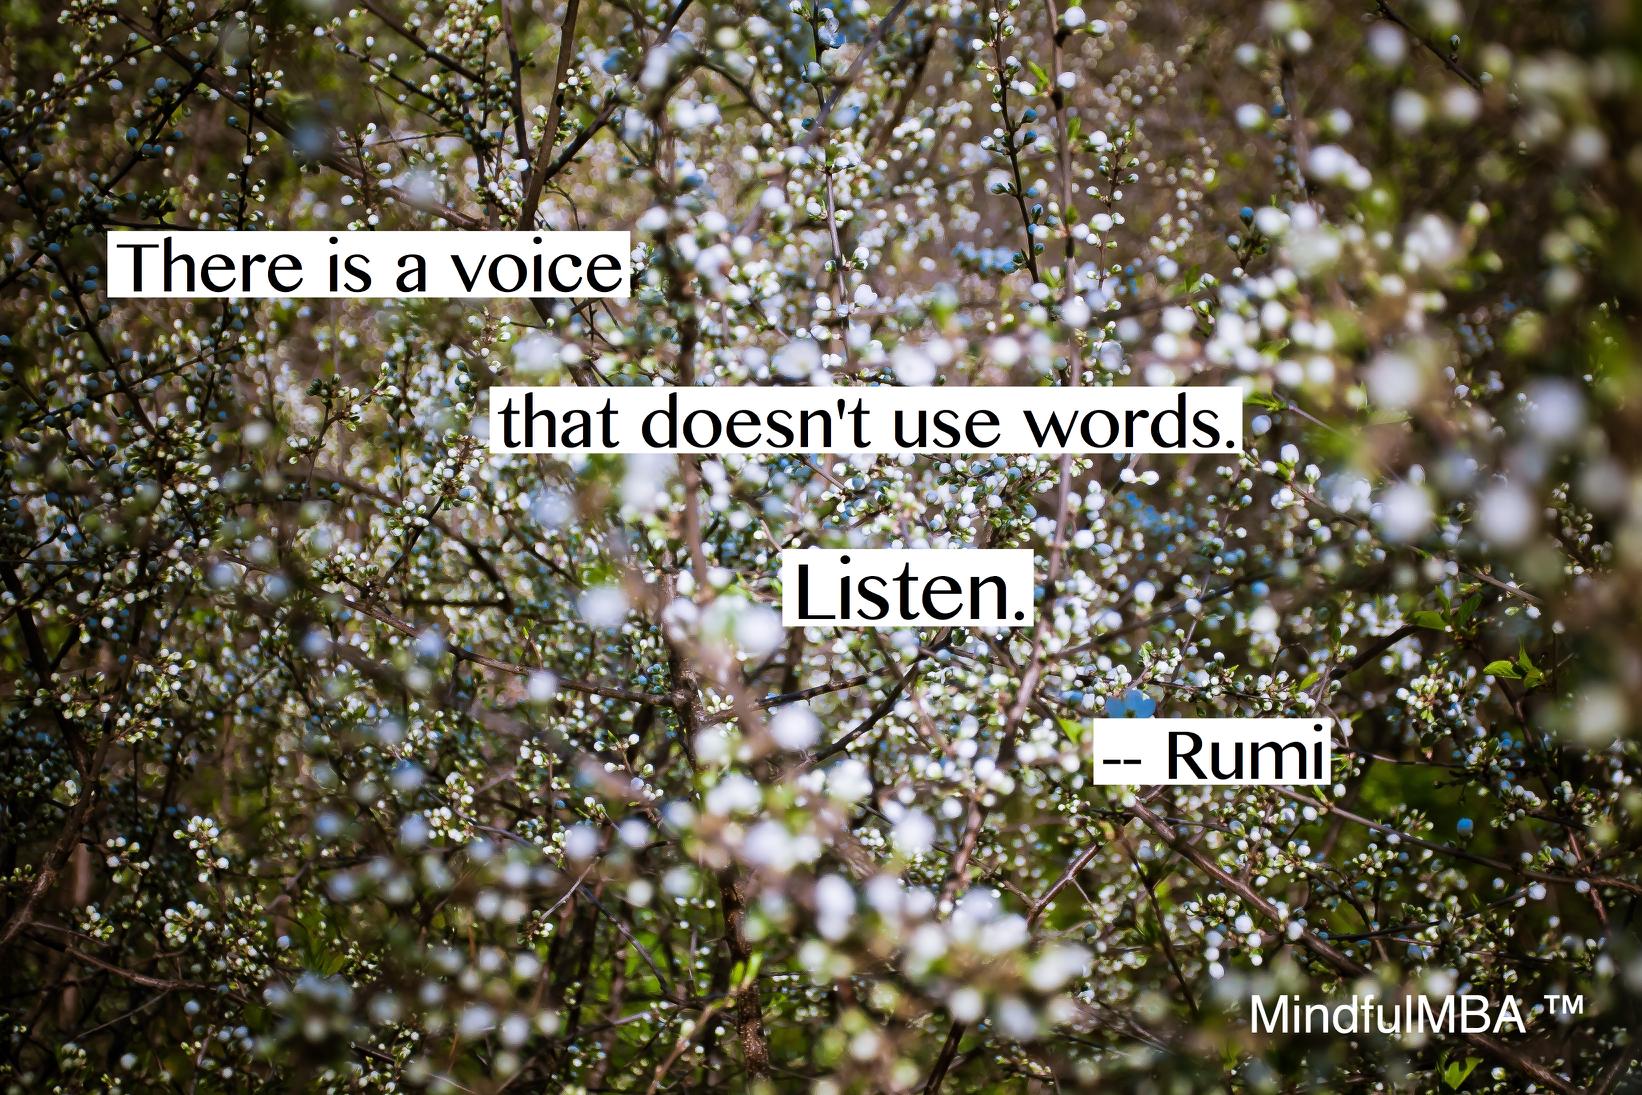 Rumi voice w:out words quote w tag